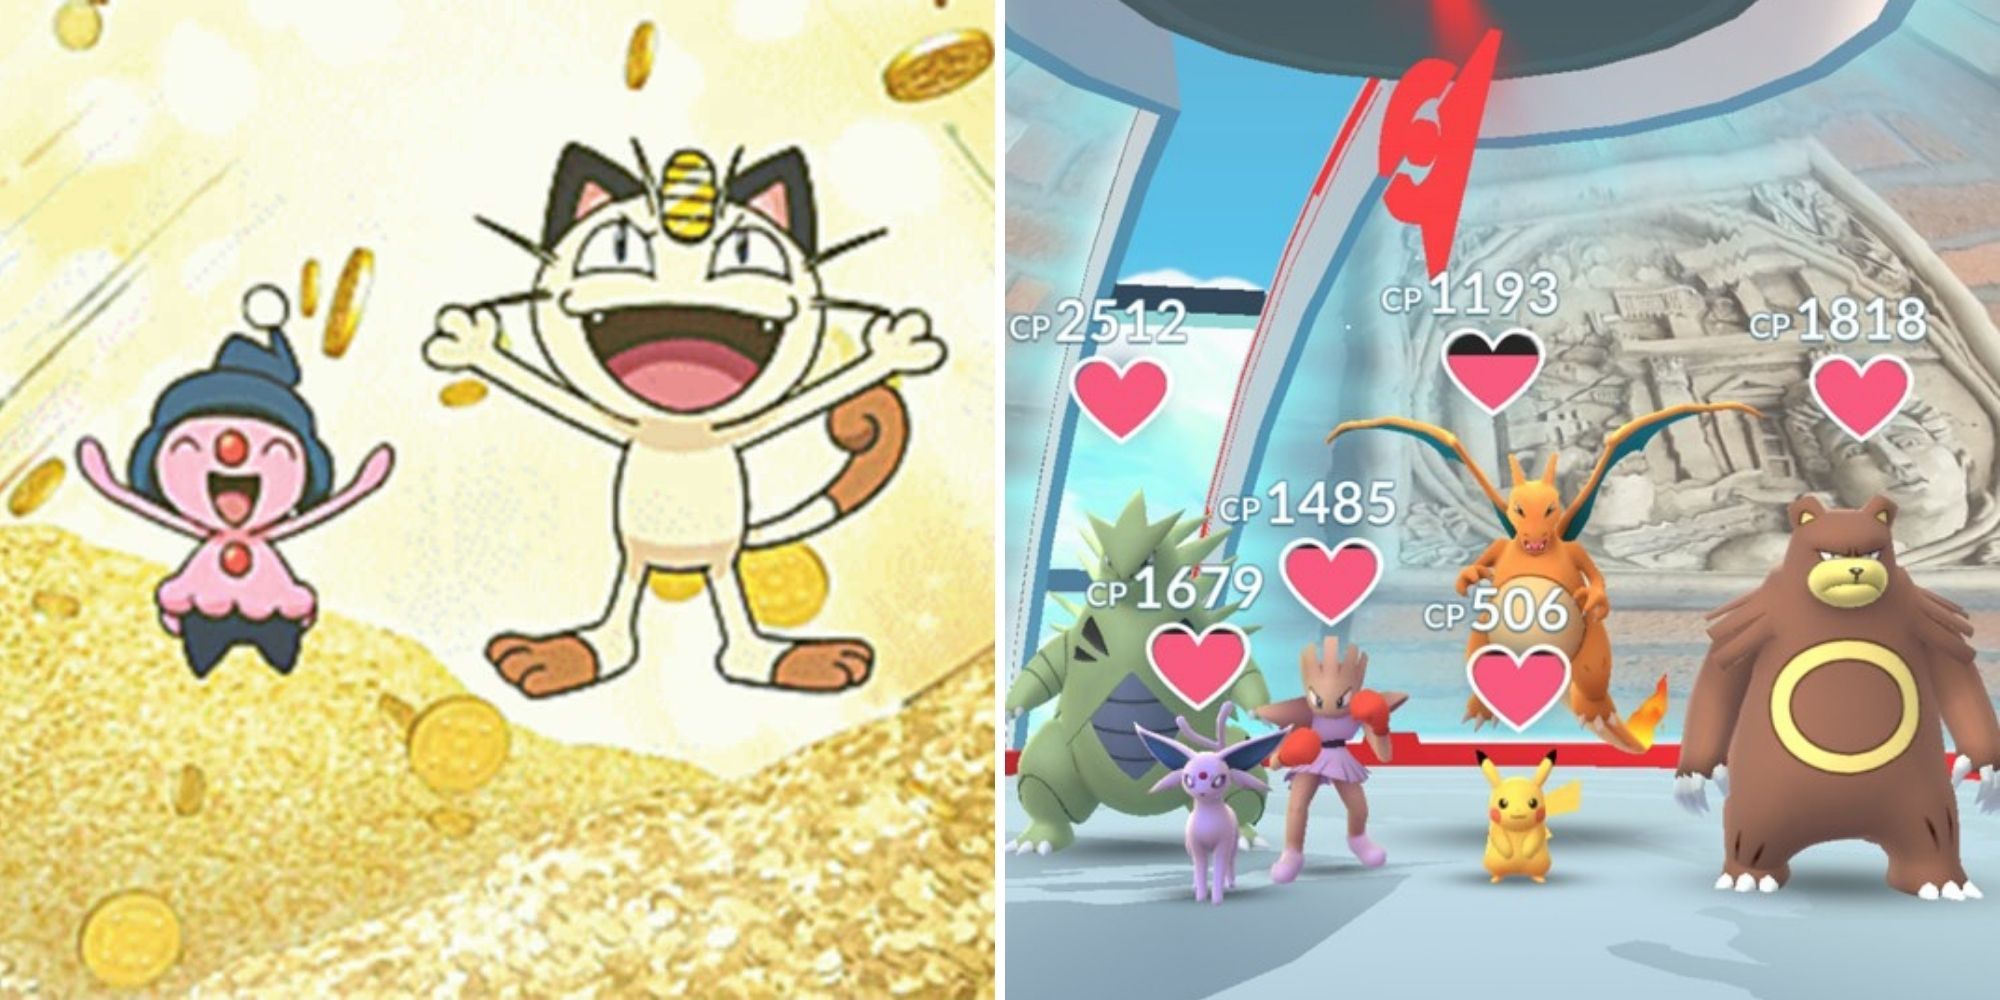 Pokemon Go Meowth In Pokecoin Pile (left), Gym With Pokemon In It (right)